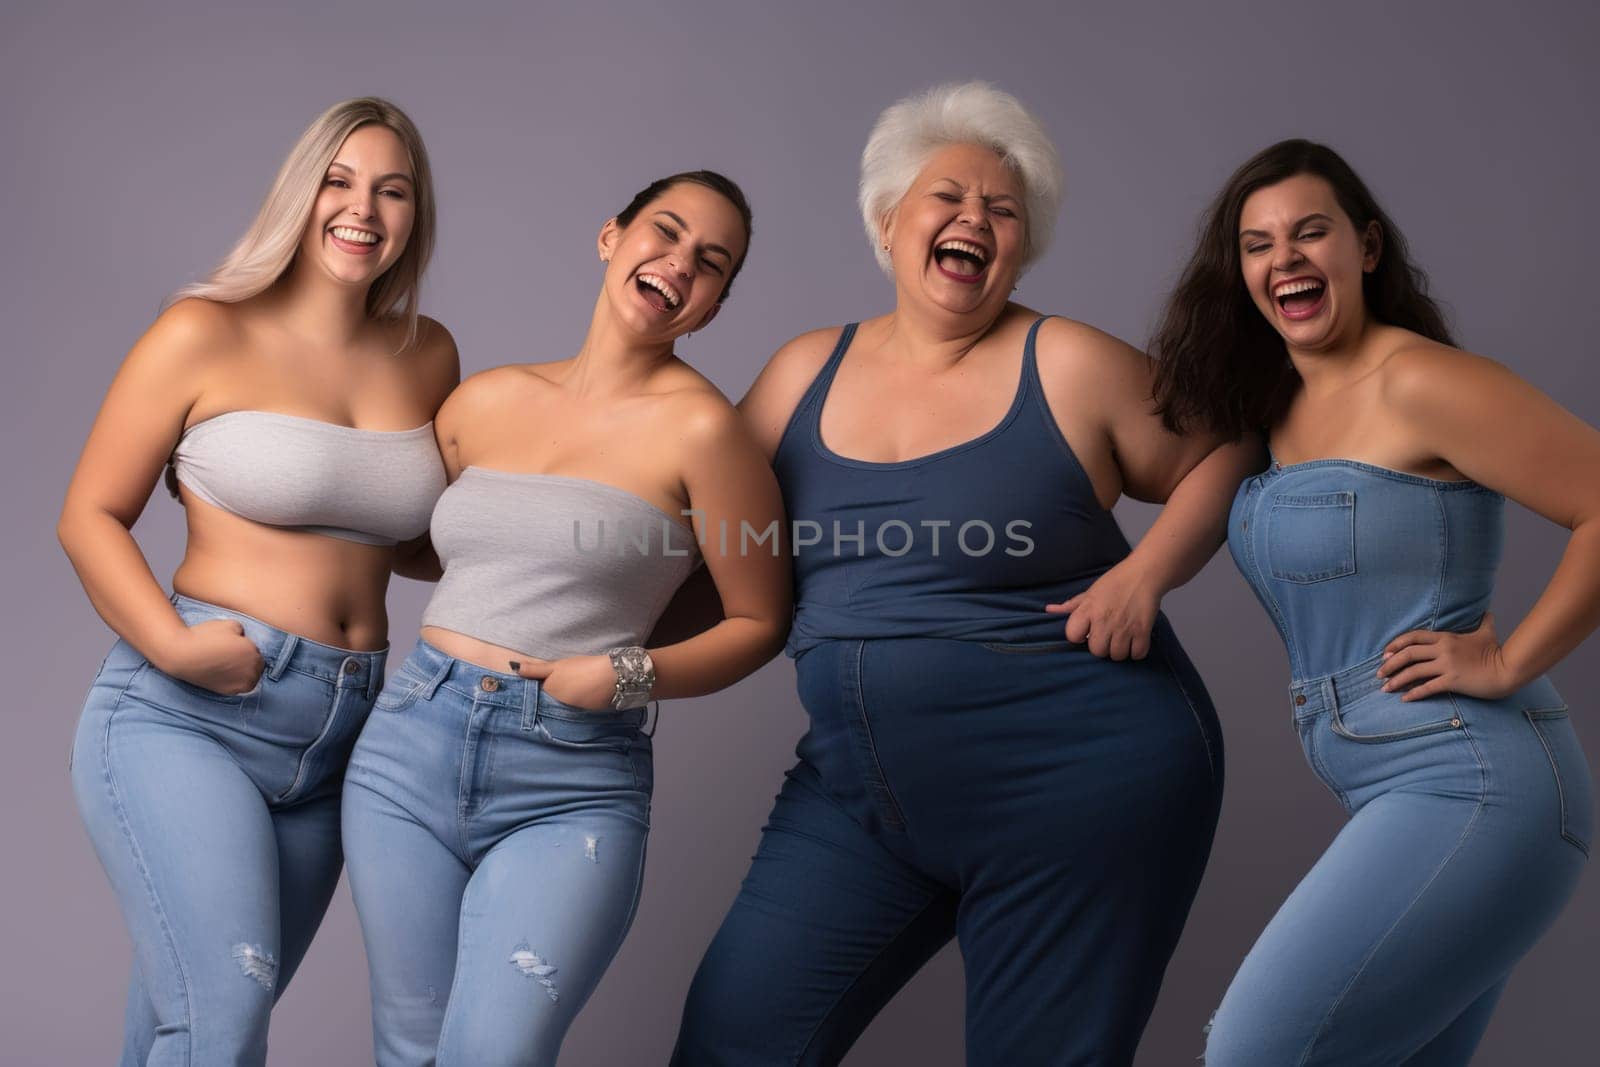 Happy plus size women. The concept of equality. by Yurich32